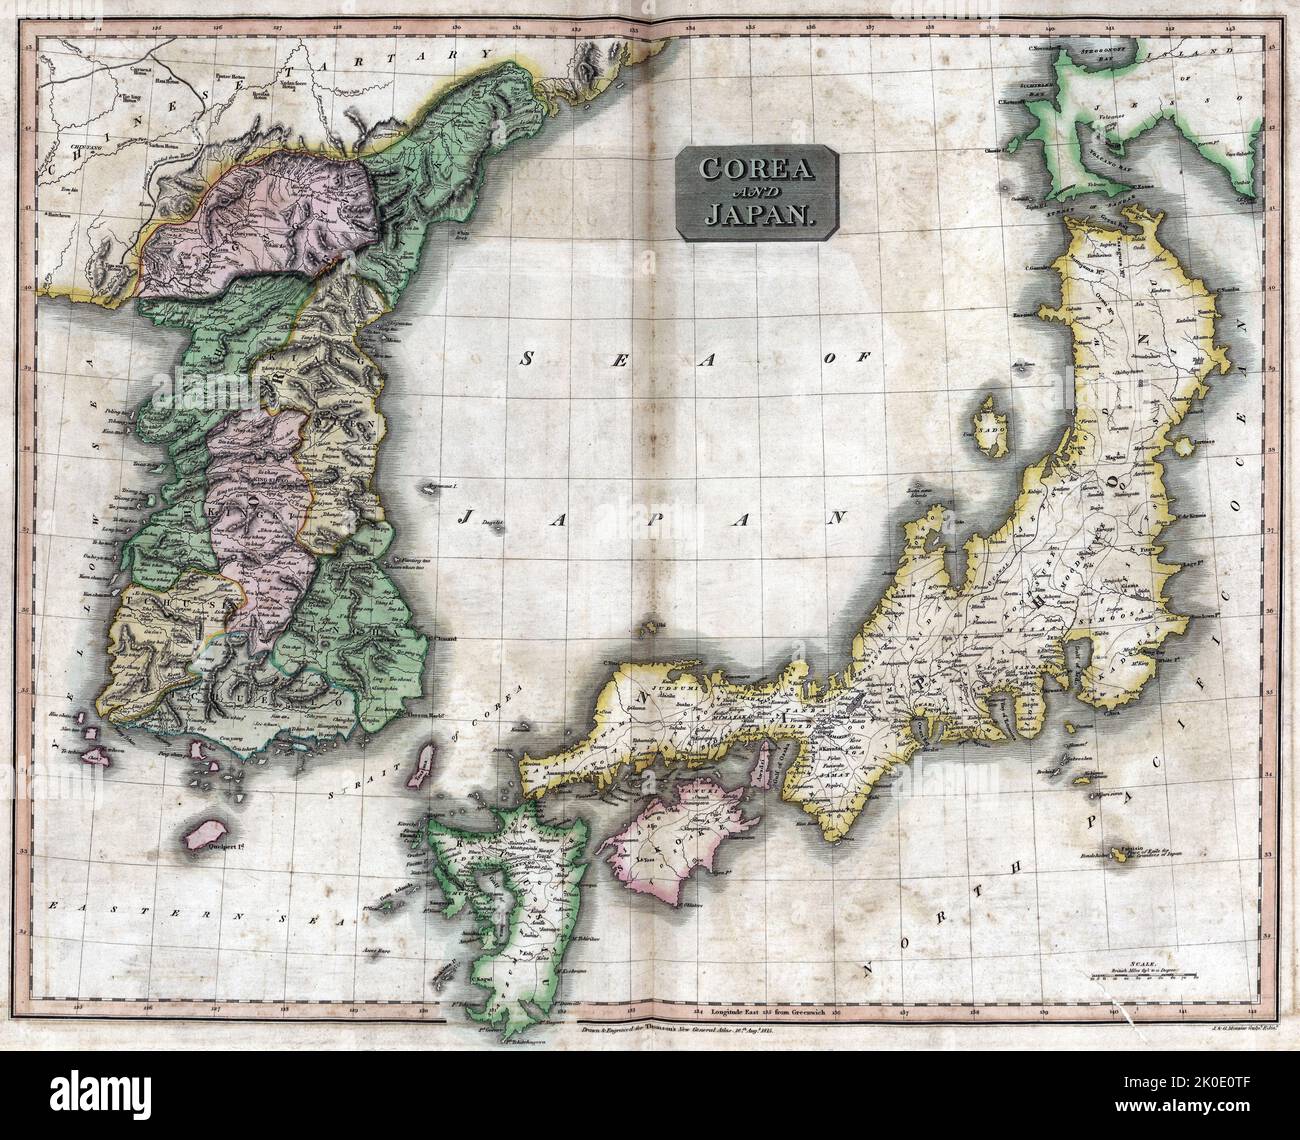 European map depicting Korea and Japan with the Sea of Japan, c1875. Stock Photo